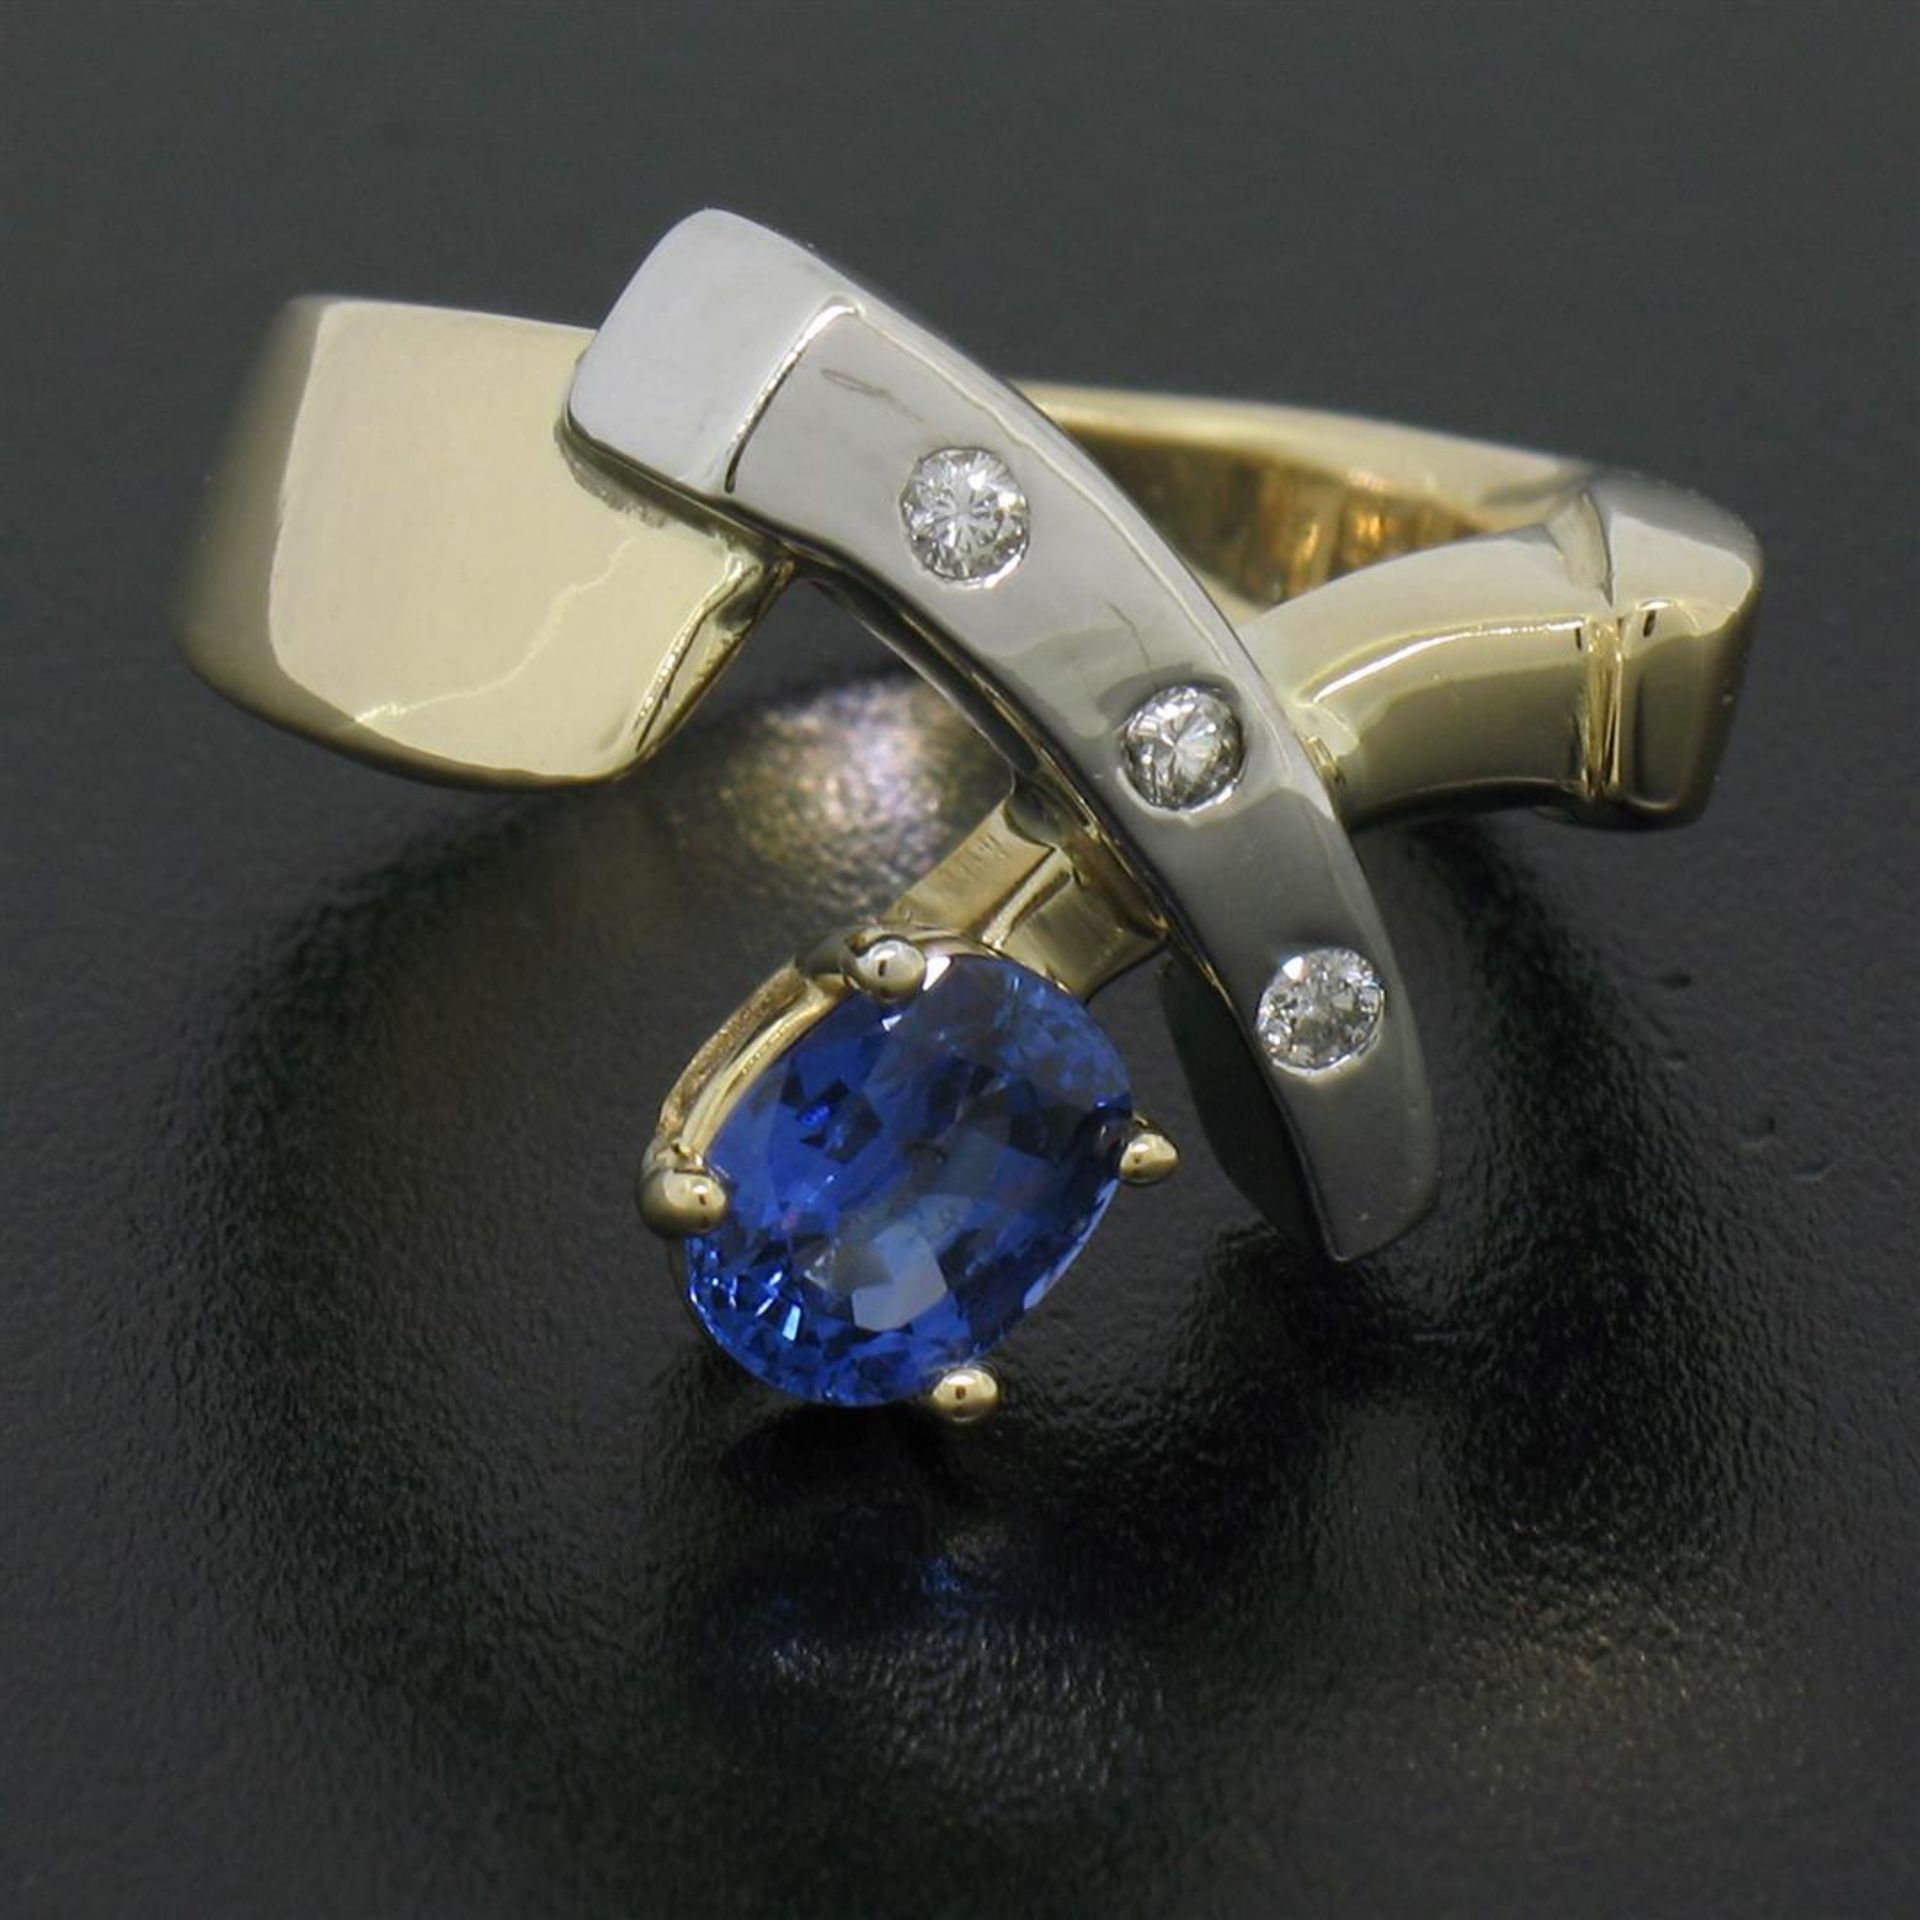 Two Tone 14K Gold 0.98ctw QUALITY Sapphire Solitaire Ring w/ 3 Diamond Accents - Image 5 of 7